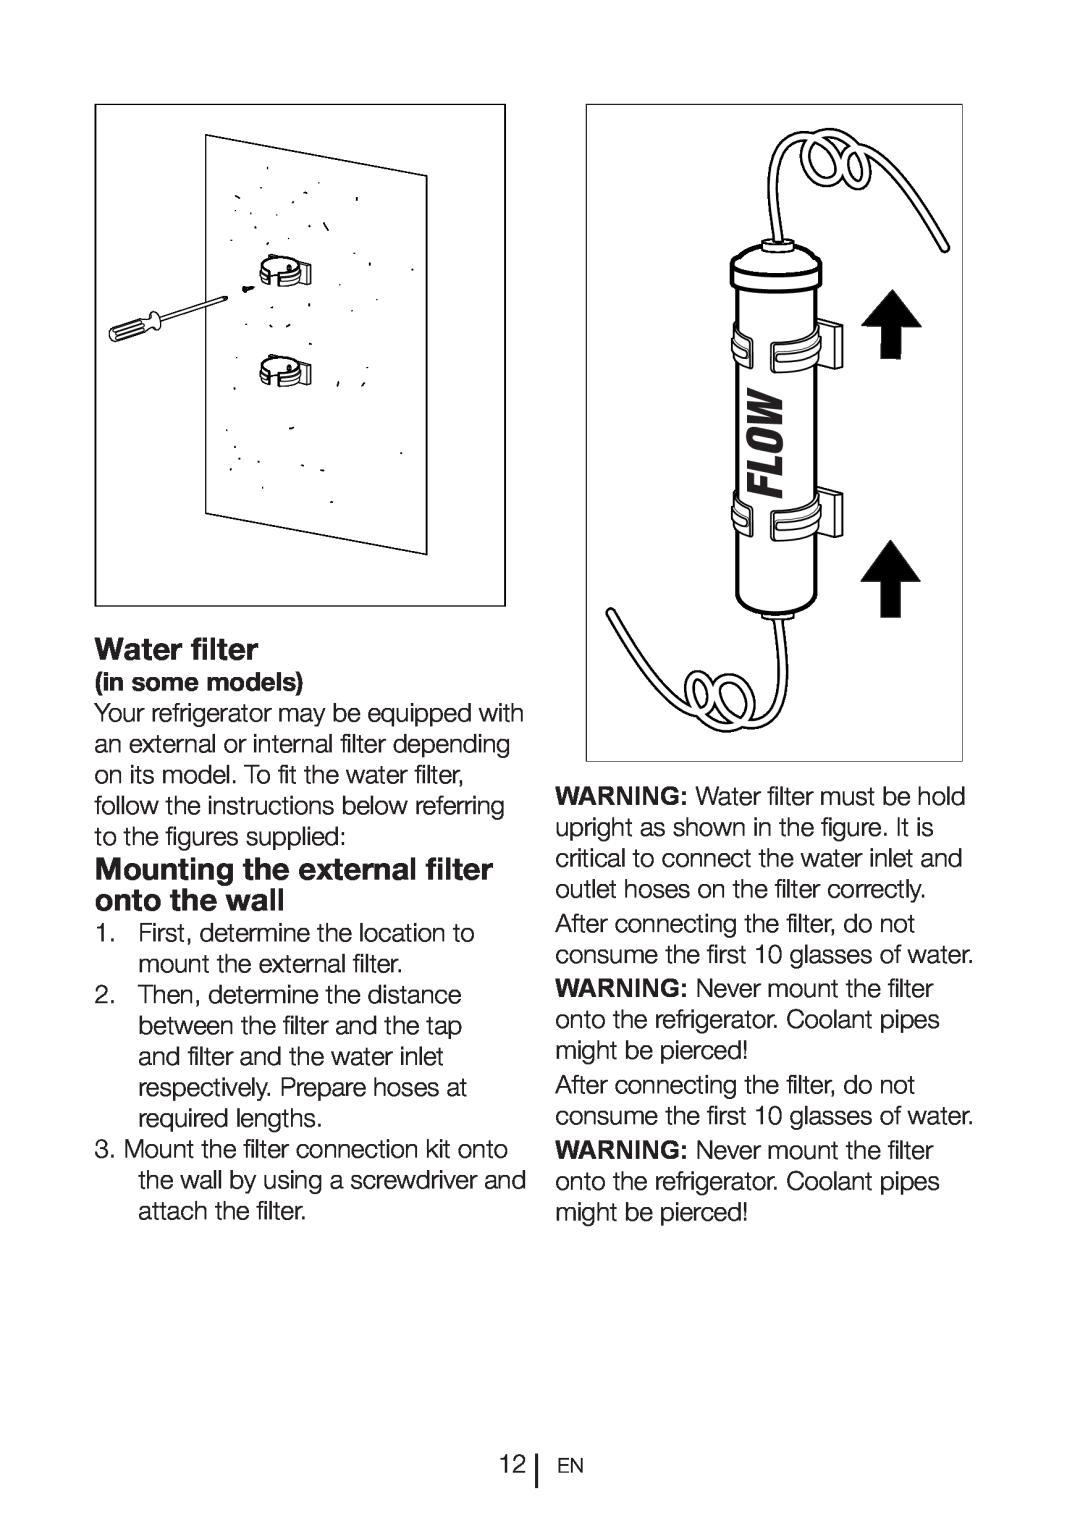 Beko CN111520 manual Water filter, Mounting the external filter onto the wall, in some models 